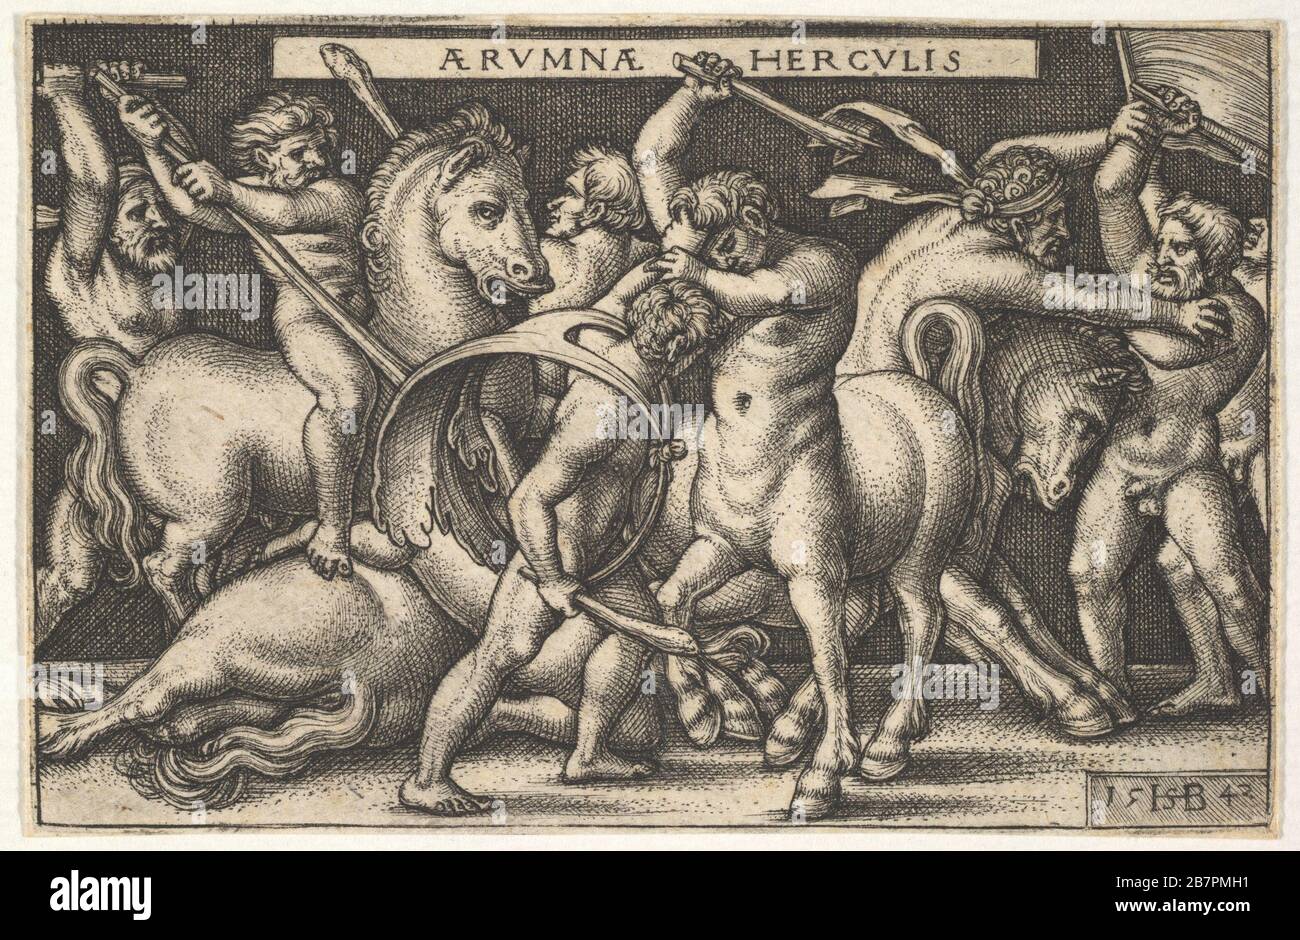 Hercules with his club in center fighting a centaur, other men fighting centaurs to left and right, from 'The labors of Hercules', 1542. Stock Photo